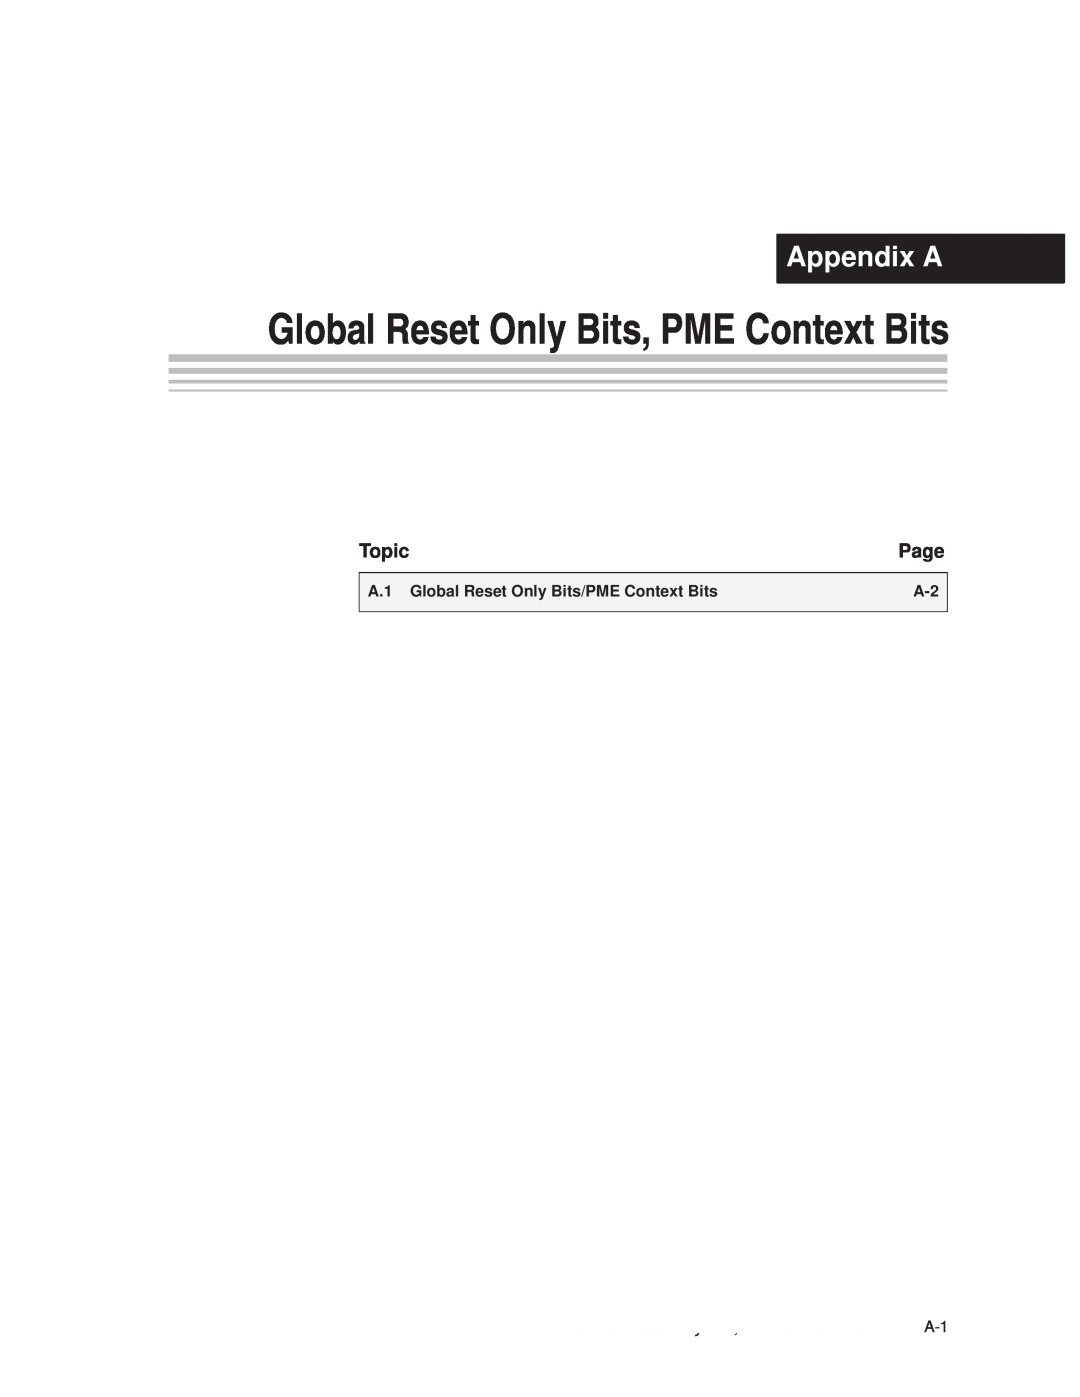 Texas Instruments PCI445X manual Appendix A, Topic, Global Reset Only Bits, PME Context Bits, Page 